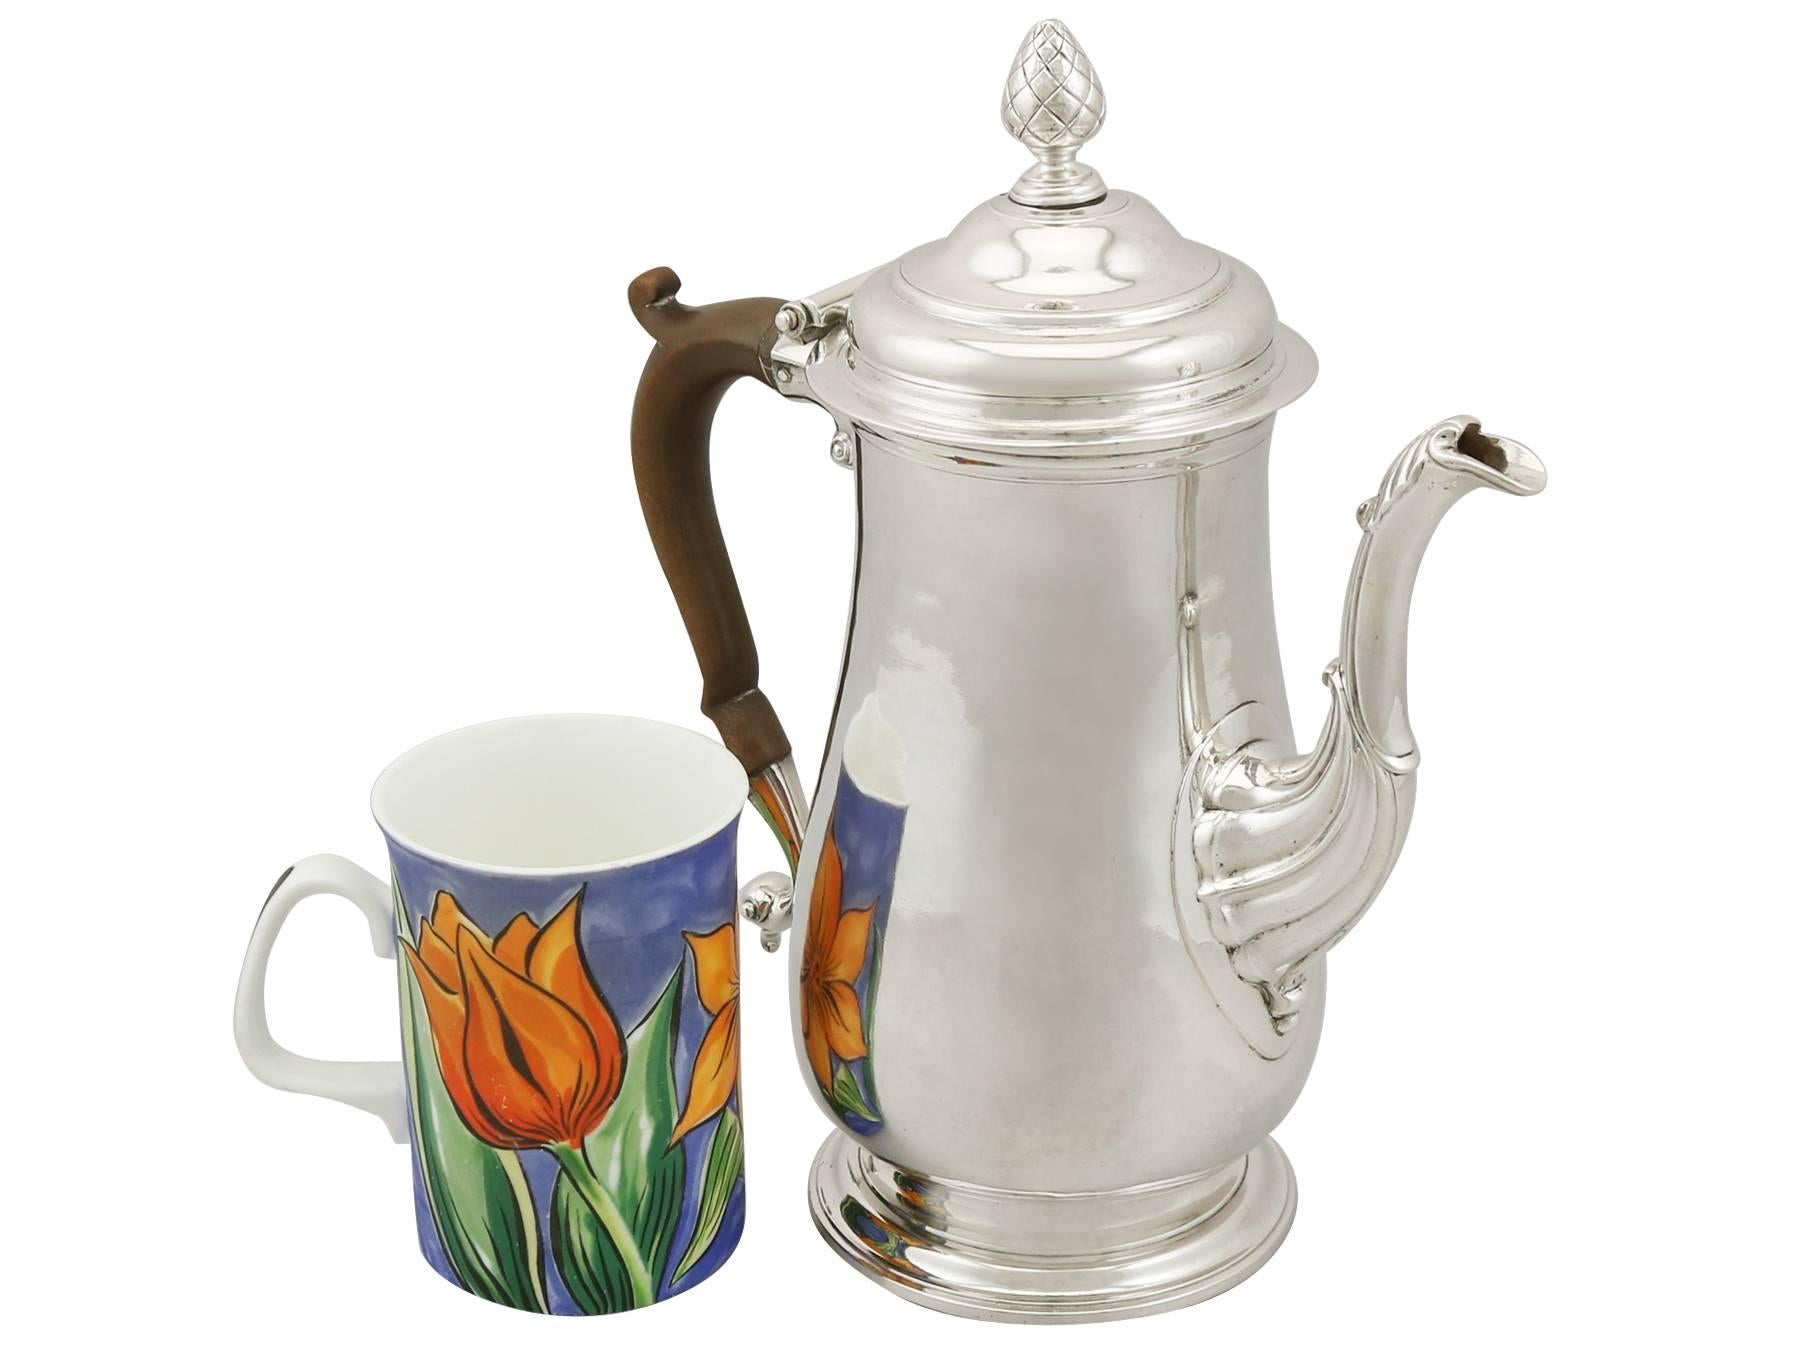 An exceptional, fine and impressive antique George II Newcastle sterling silver coffee pot; an addition to our Georgian silver teaware collection.

This exceptional antique George II Newcastle sterling silver coffee pot has a baluster shaped form